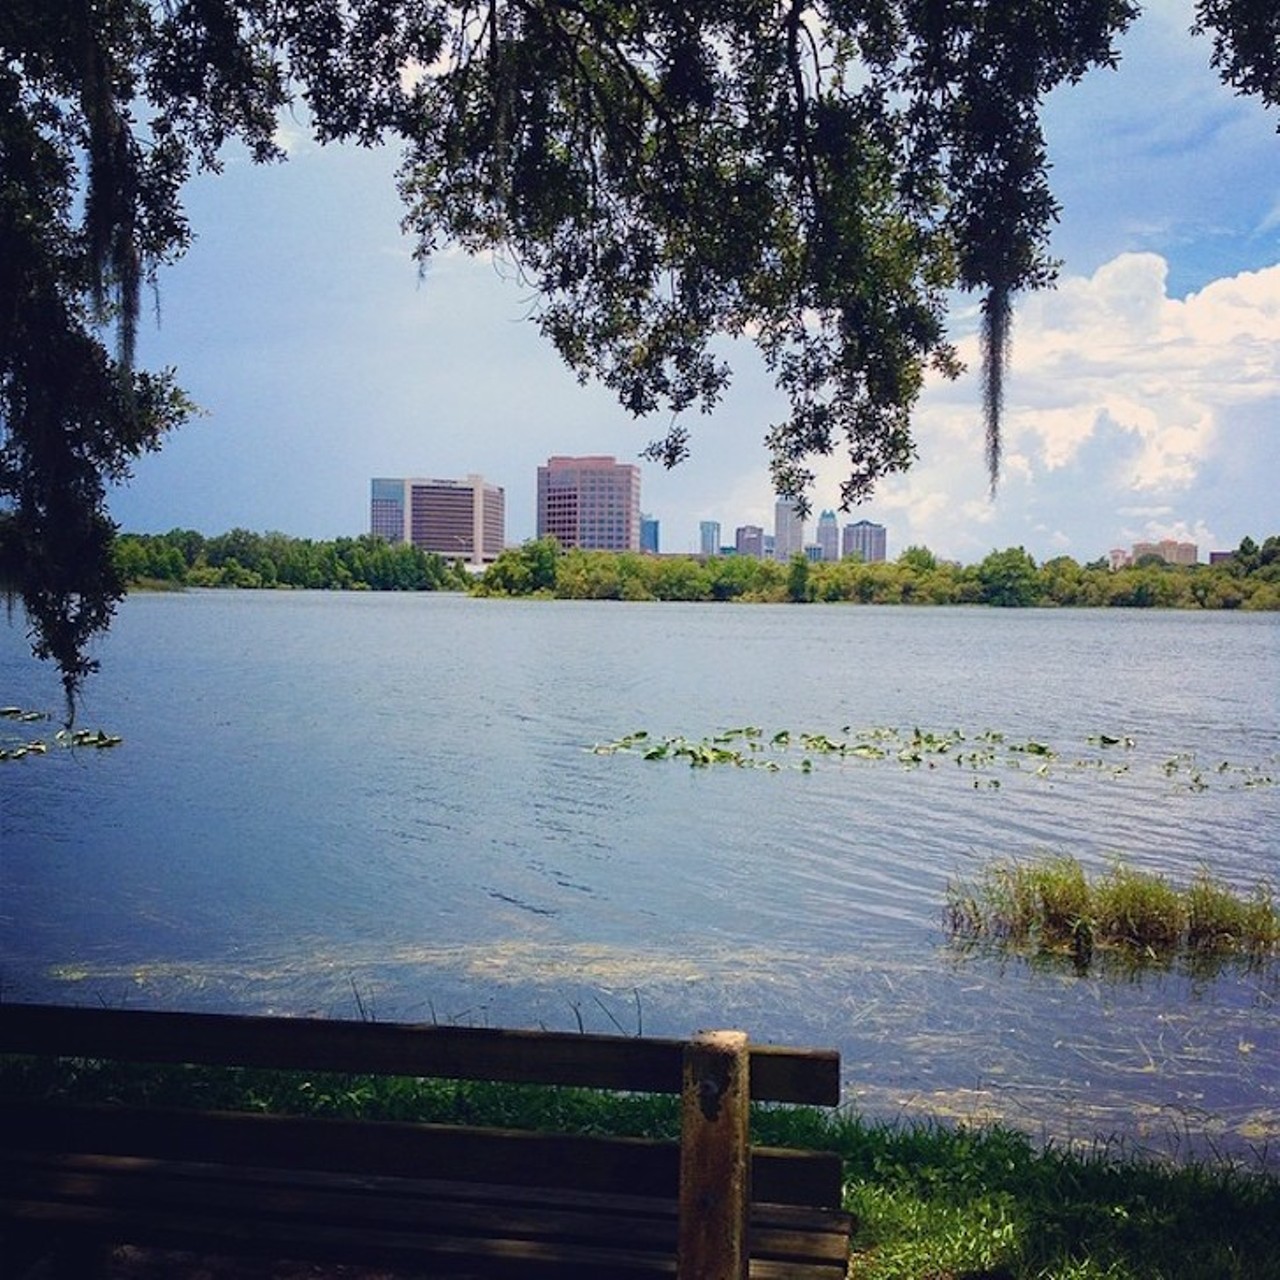 Lake Ivanhoe Park
57 S. Ivanhoe Blvd.
Distance from Orlando: 12 minutes
A backdrop of buildings against the still water near the I-4 bridge is a perfect destination to go paddleboarding. Lake Ivanhoe lies in the heart of downtown Orlando and offers a great area to spend a day on the board. 
Photo via grantgentry/Instagram